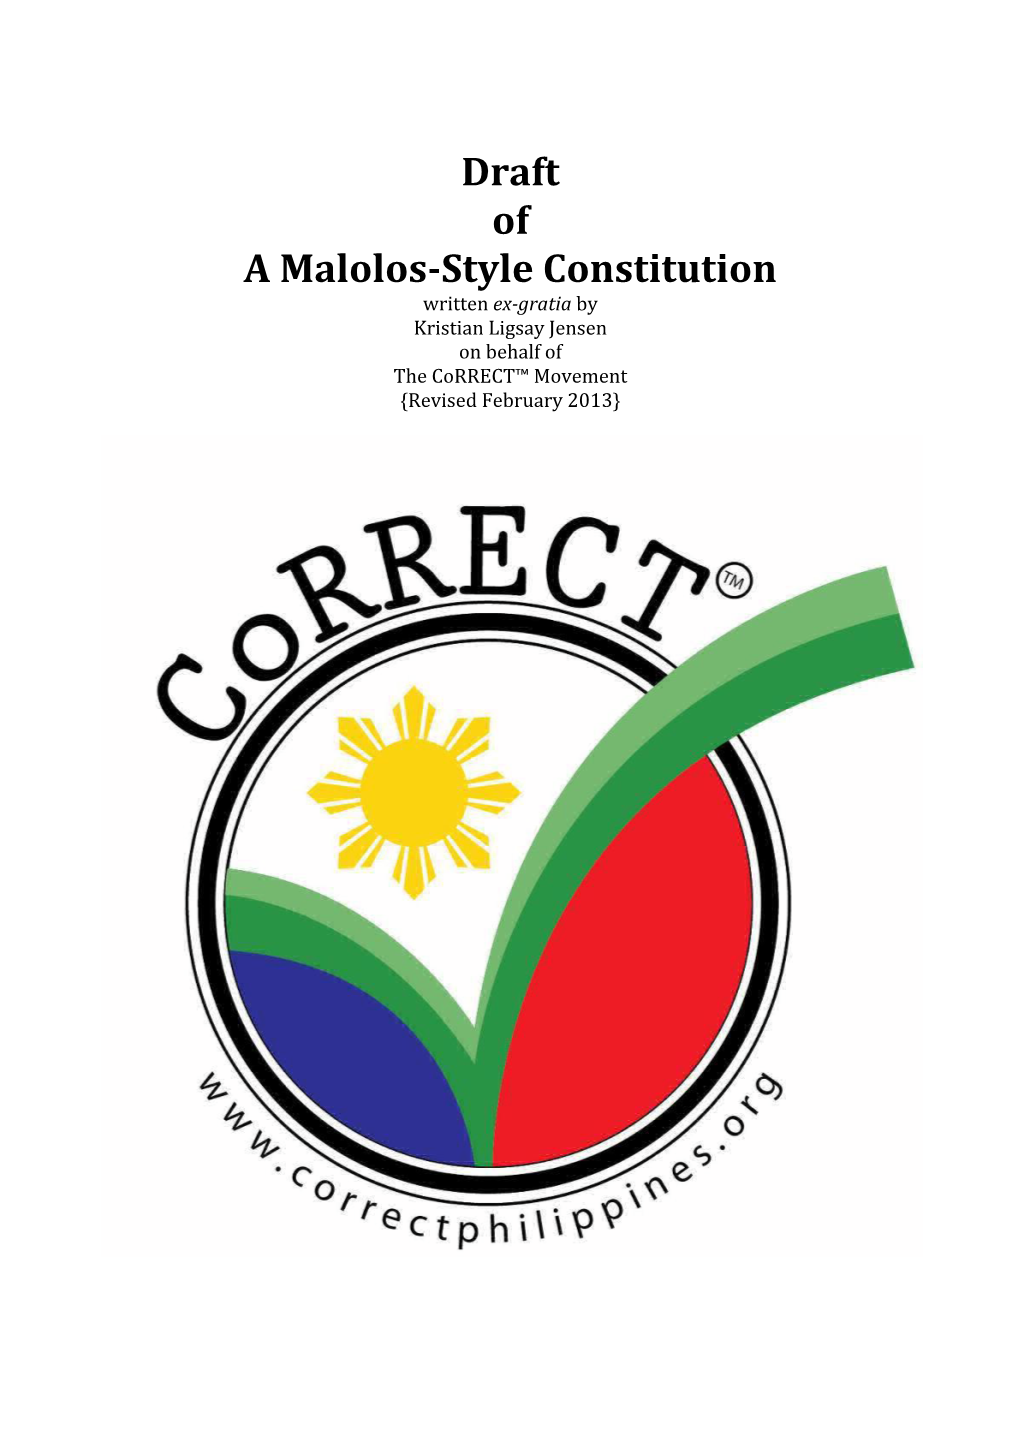 Draft of a Malolosstyle Constitution